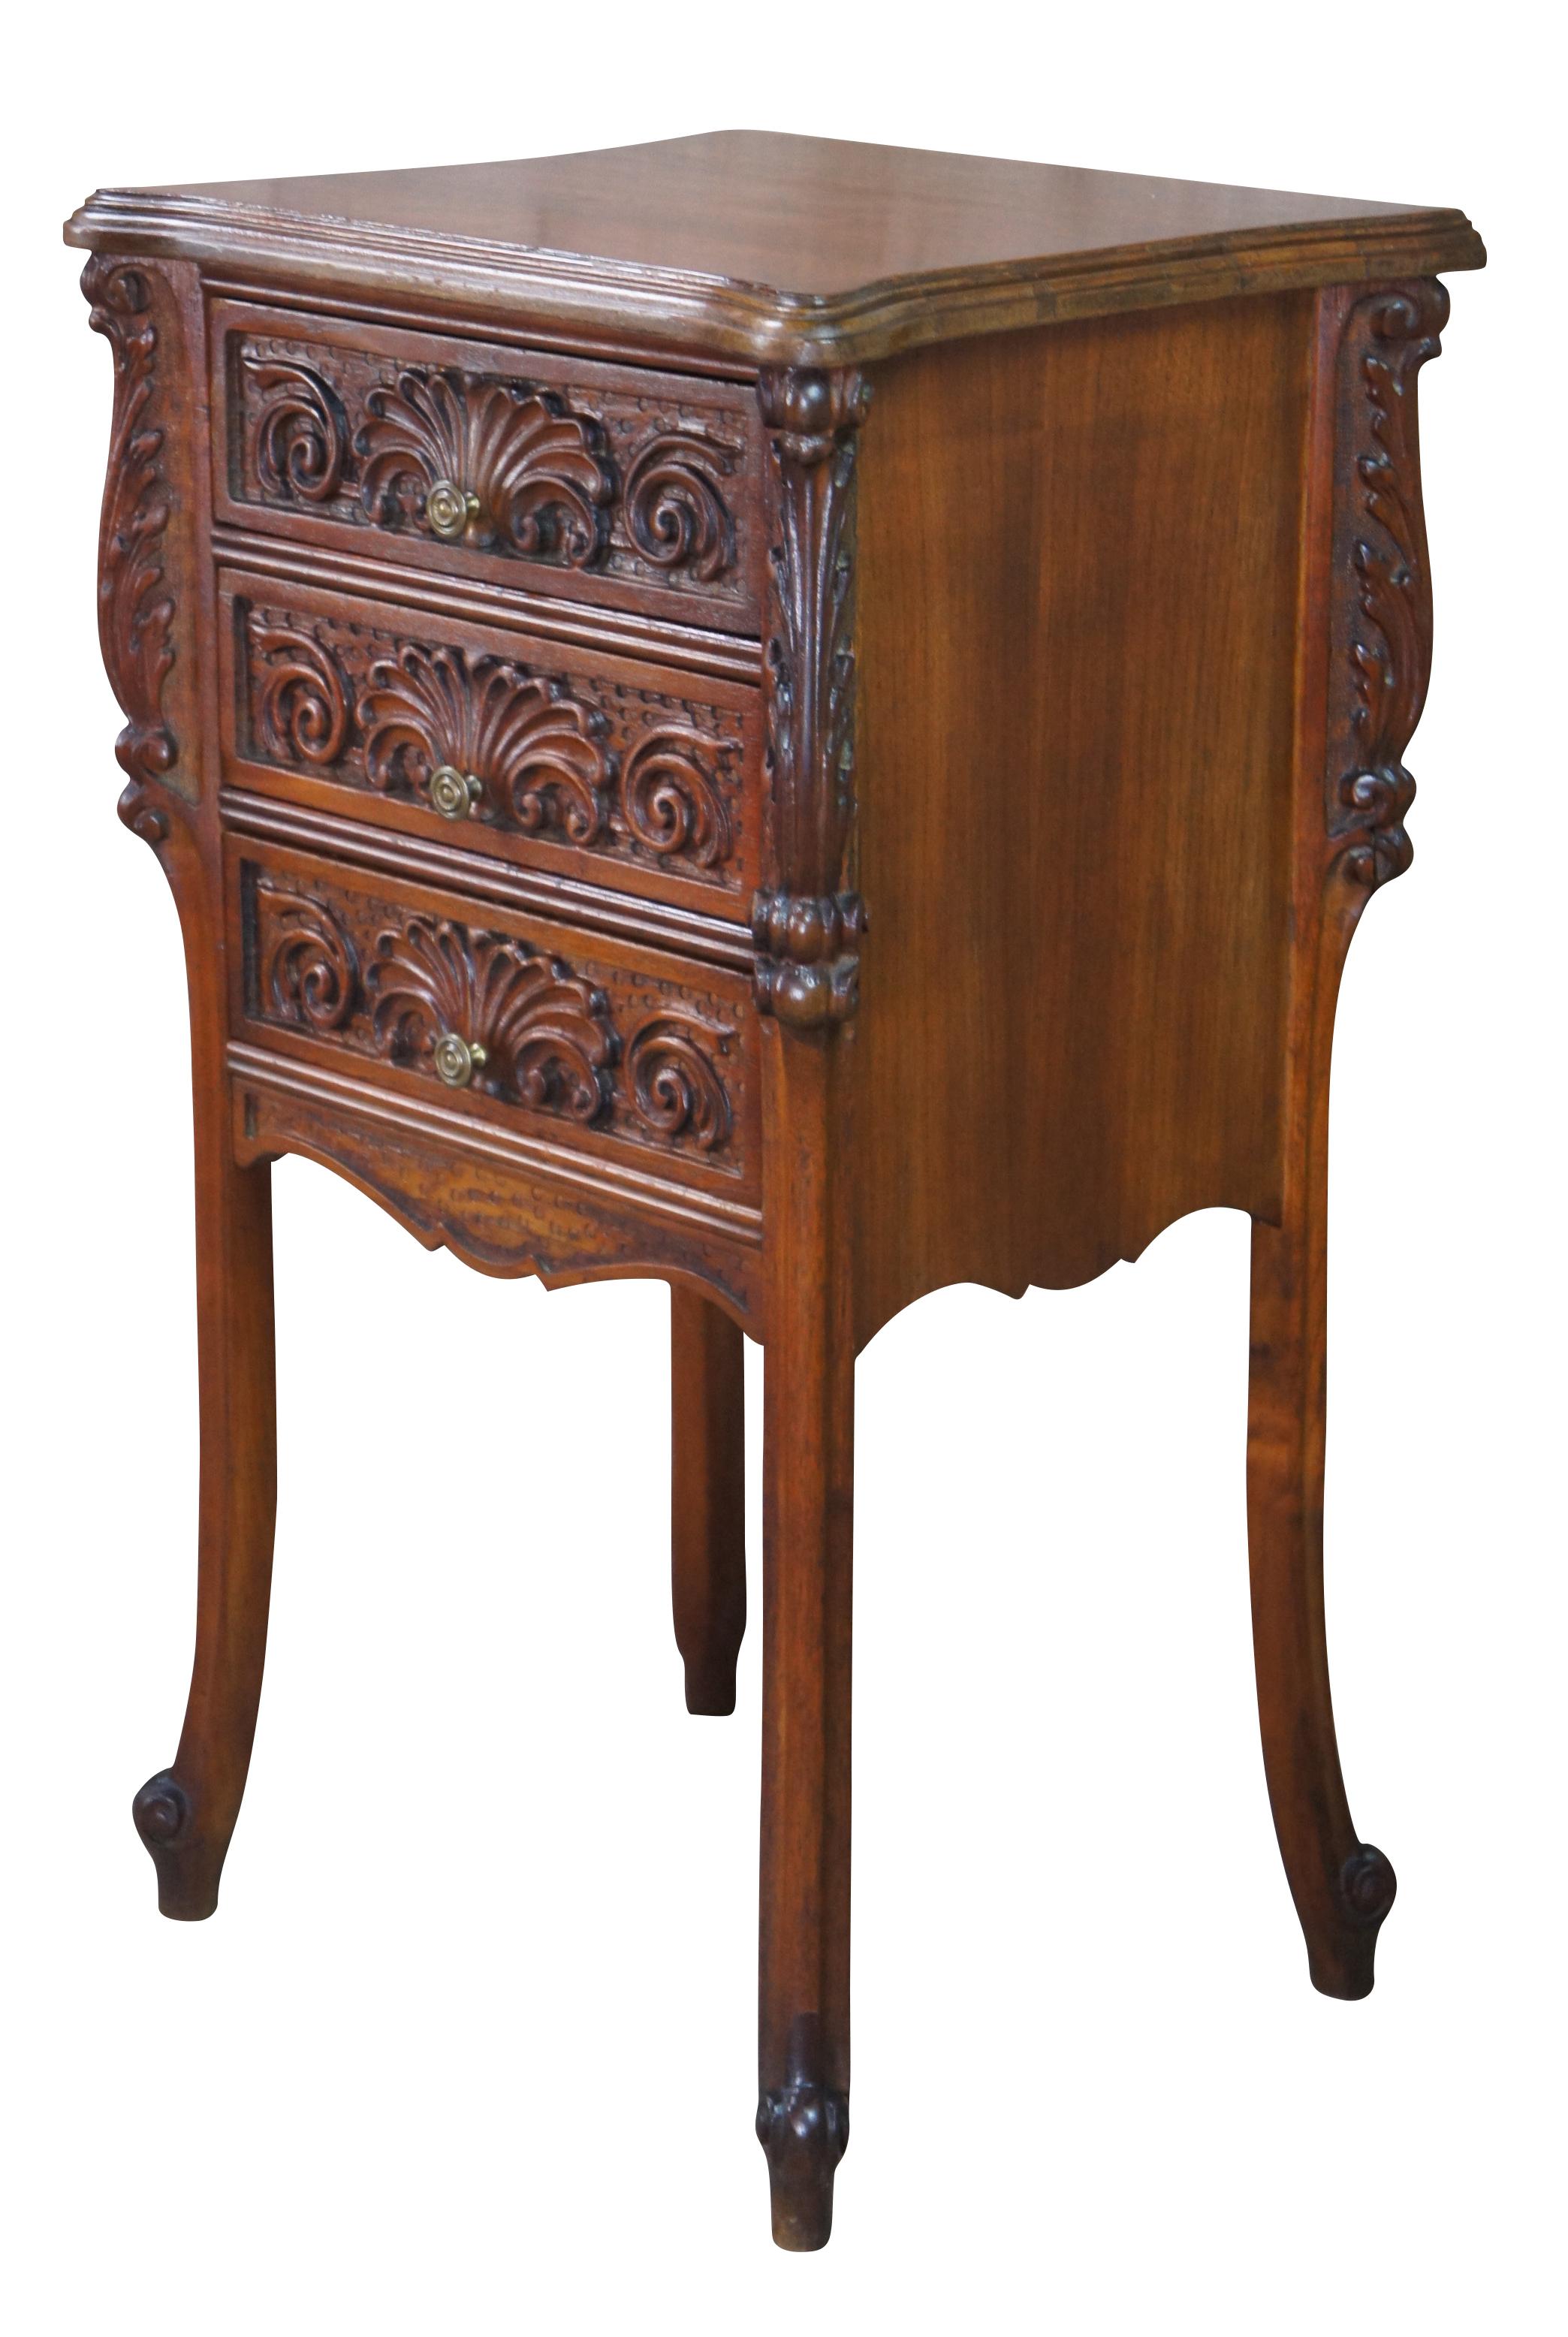 Antique French nightstand or side table. Made of walnut featuring three drawers with shell and catouche carvings between thick acanthus accents, and cabriole legs leading to scrolled feet. Measures: 27